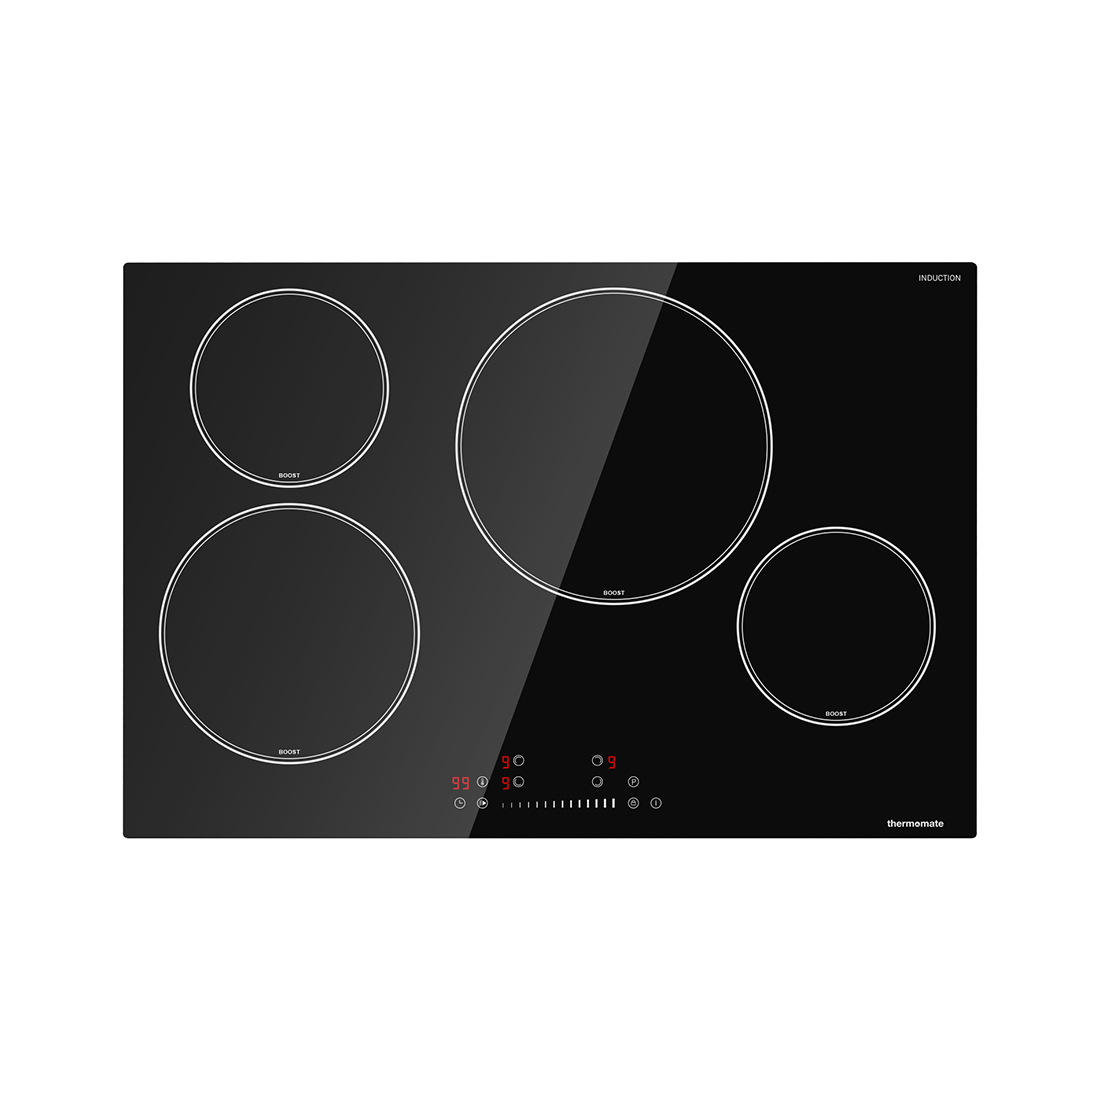 30 Inch Built-in Induction Cooktop with 4 Burners electric stovetop kitchen appliances